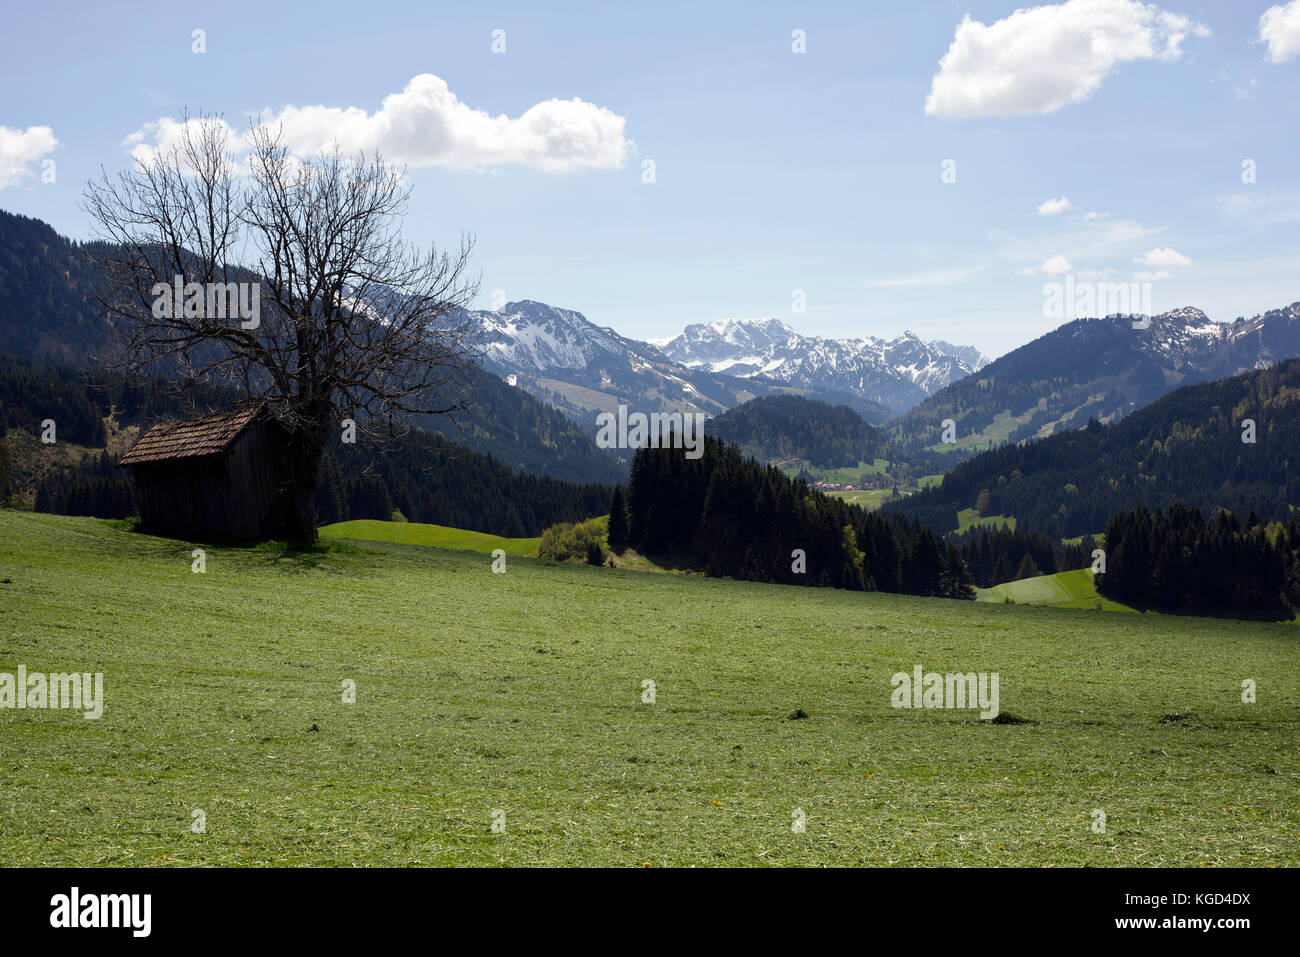 Freshly mowed grass and view of Allgäu Alps in the mountain exclave quadripoint border area of Jungholz, Tirol, Austria. Stock Photo